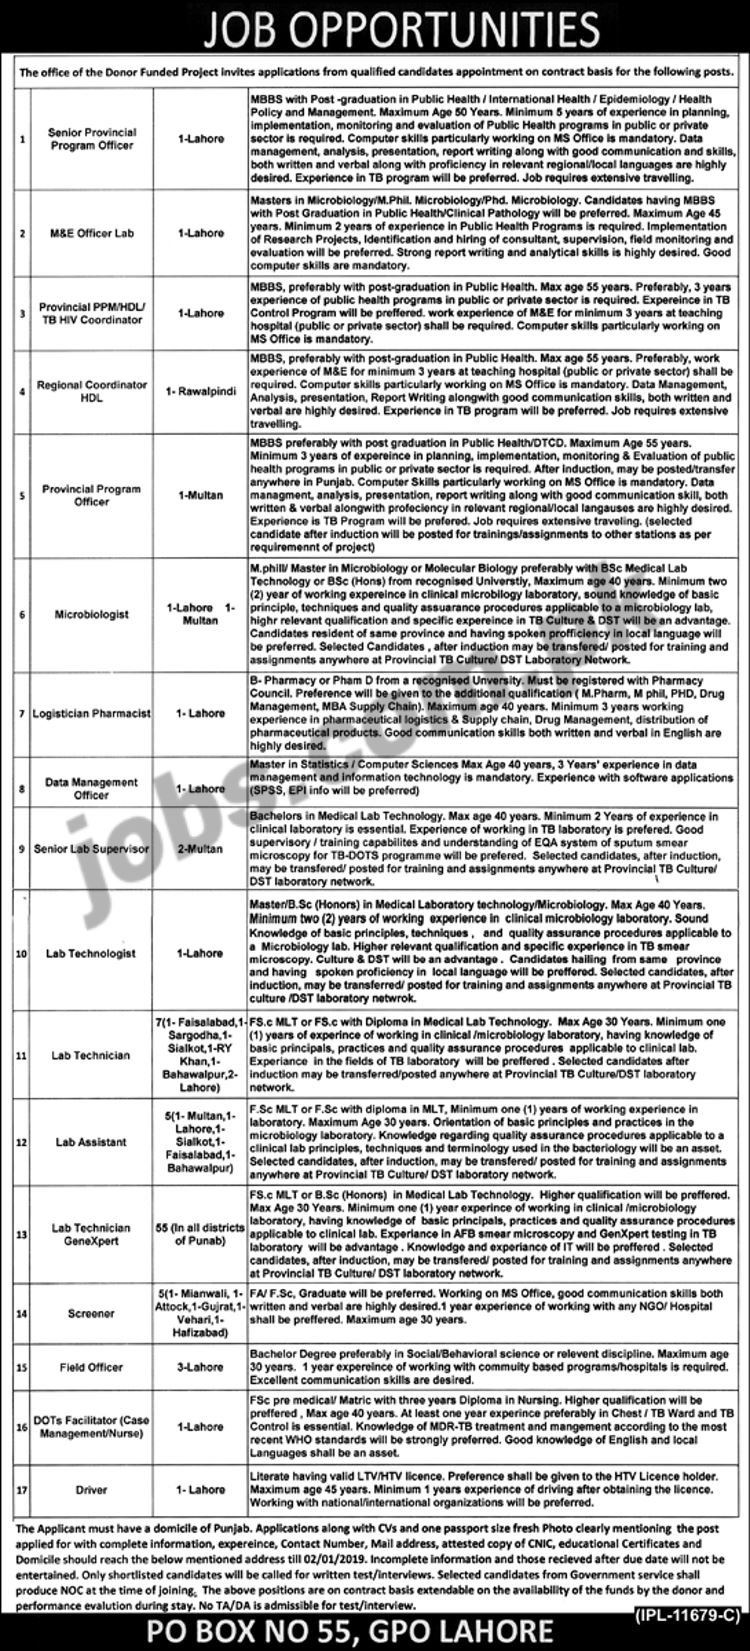 PO Box 55 Public Sector Organization Jobs 2019 for 89+ IT, M&E, Program Officers, Field, Lab and Other Staff Posts (Multiple Cities)